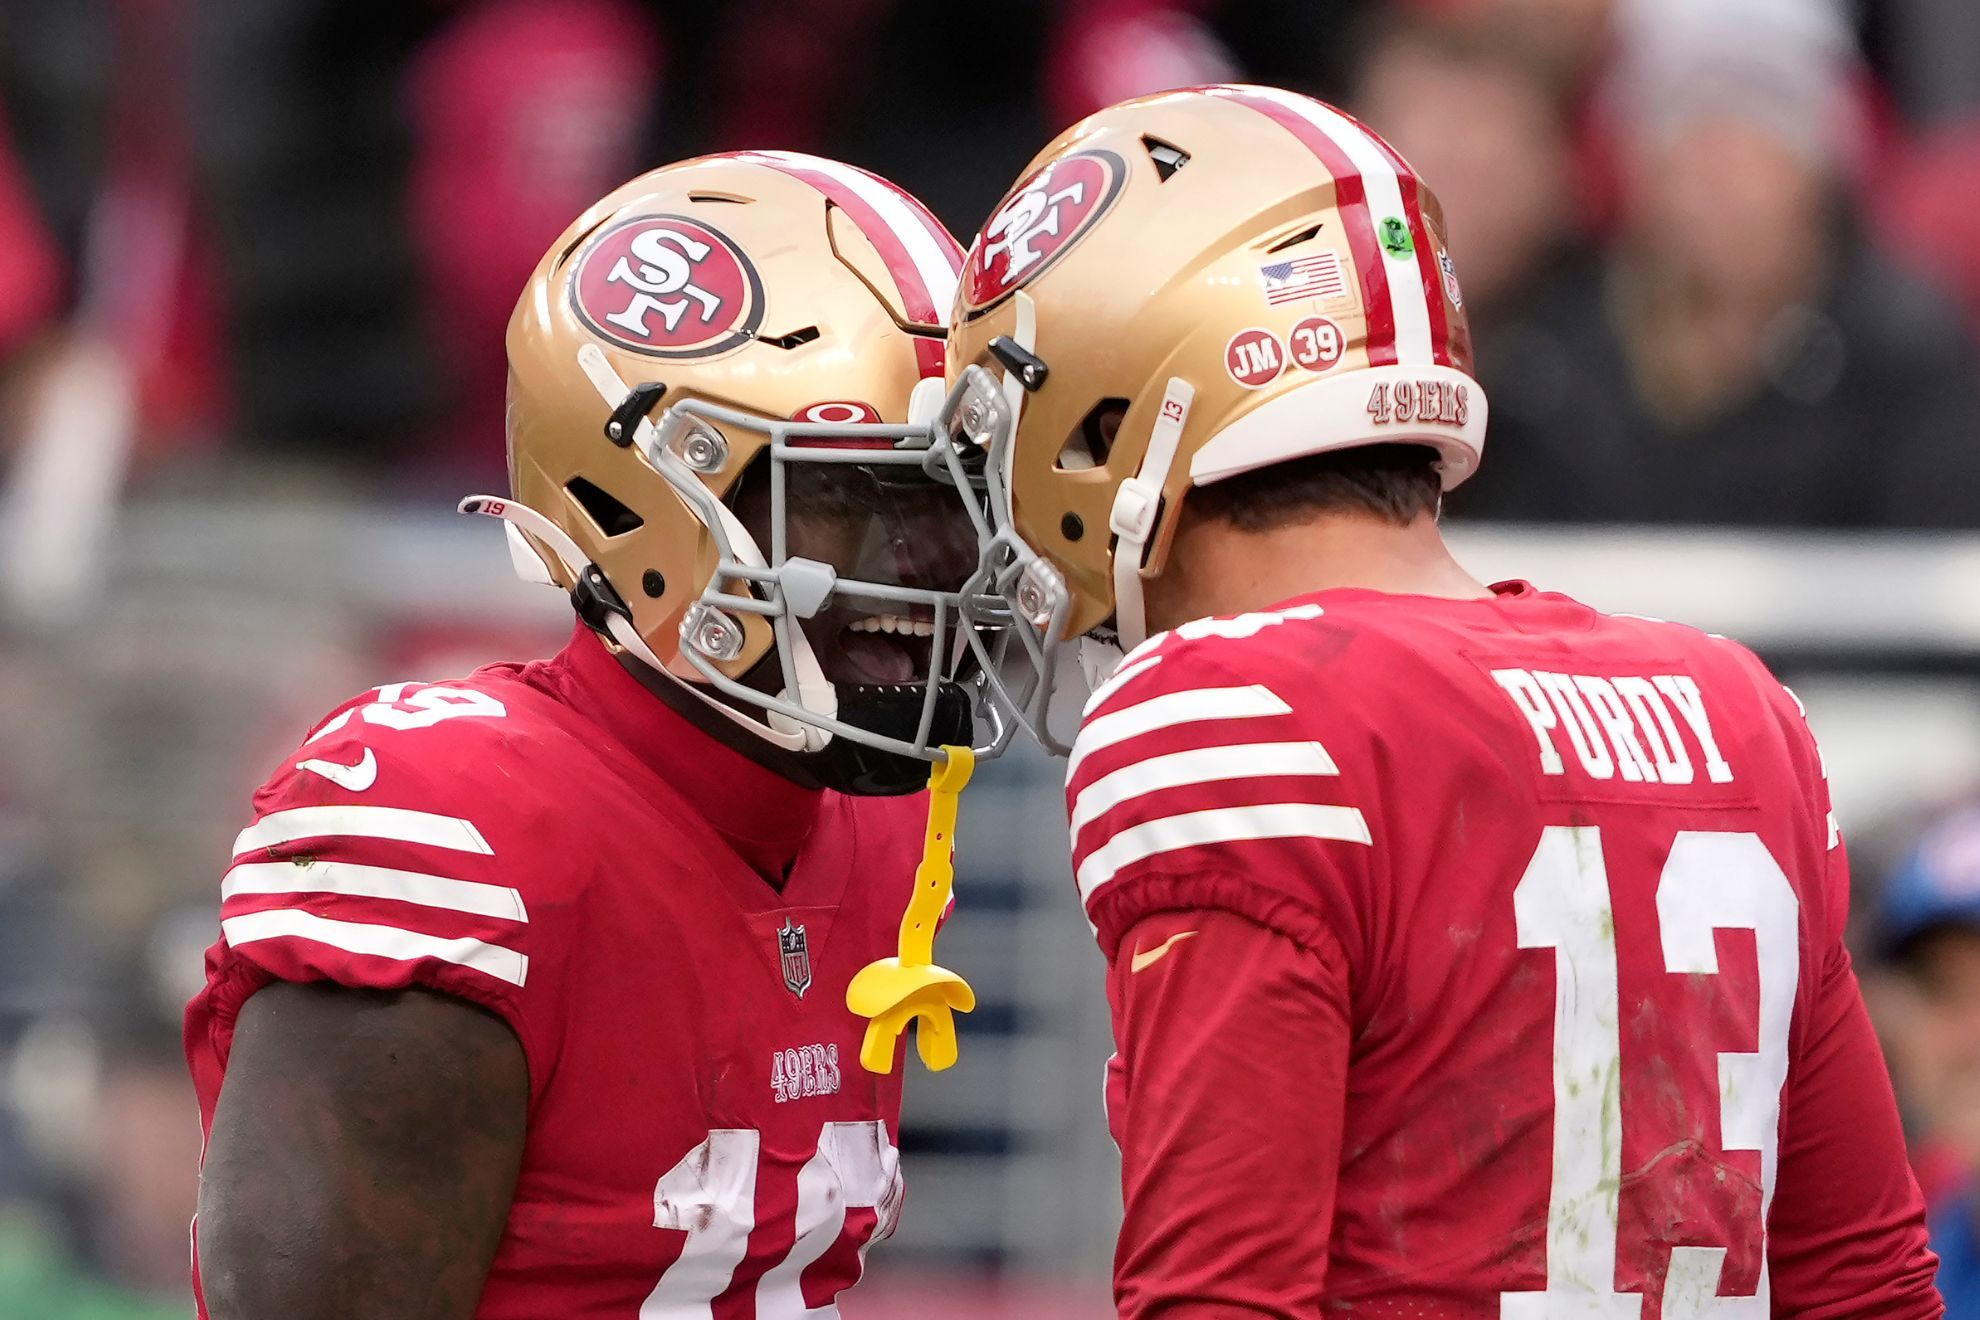 Deebo Samuel (left) and Brock Purdy (right), San Francisco 49ers